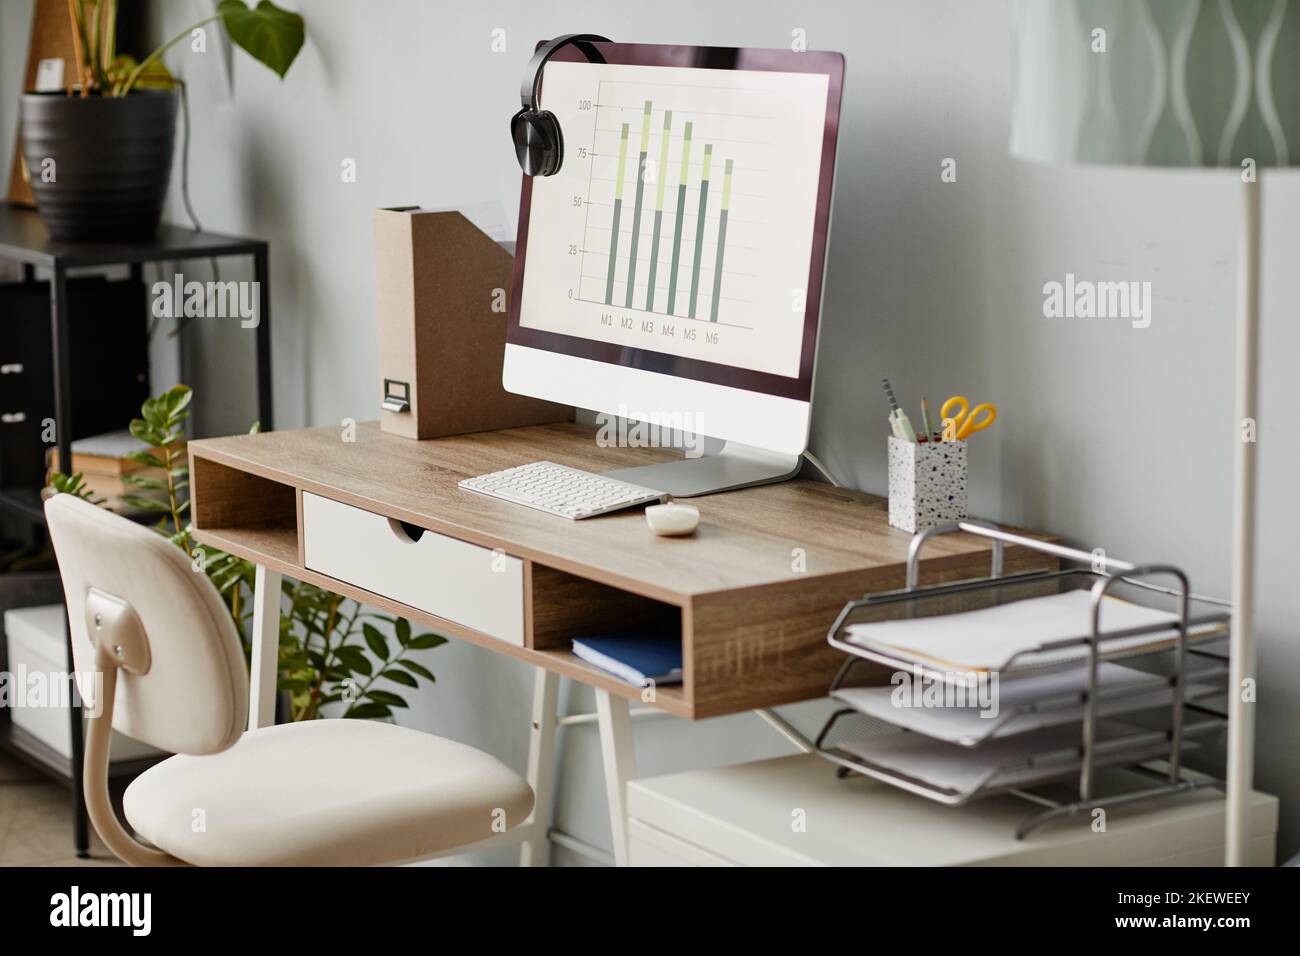 Background image of home office workplace in white with PC computer on wooden desk, copy space Stock Photo